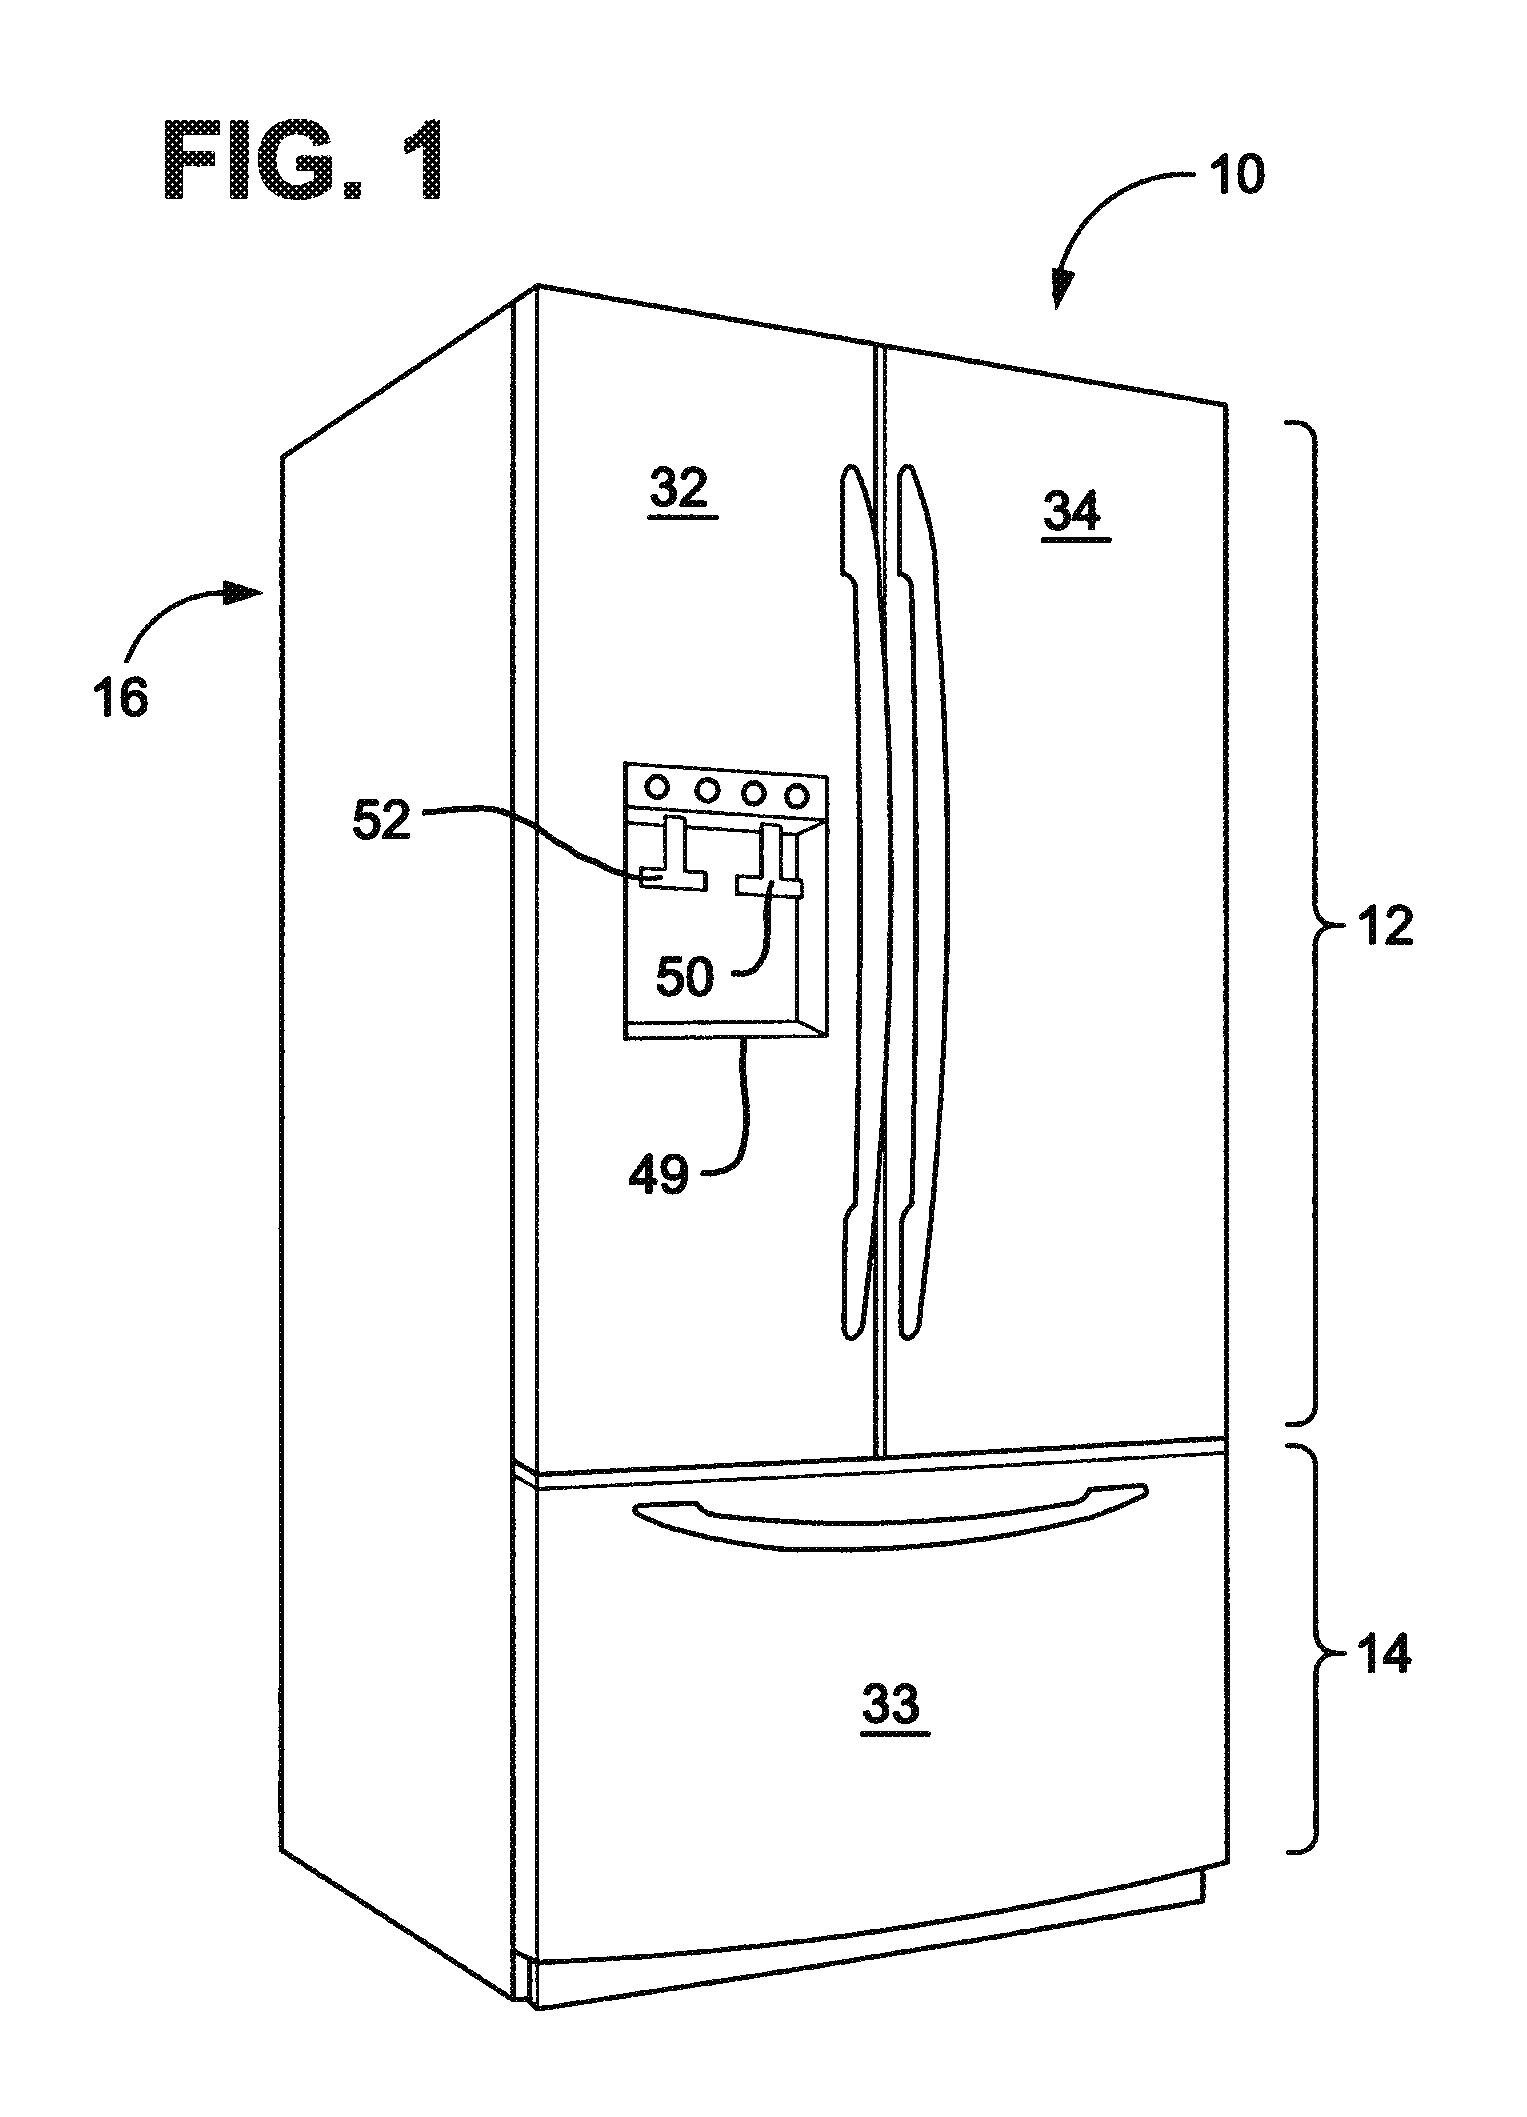 Method and apparatus for controlling temperature for forming ice within an icemaker compartment of a refrigerator